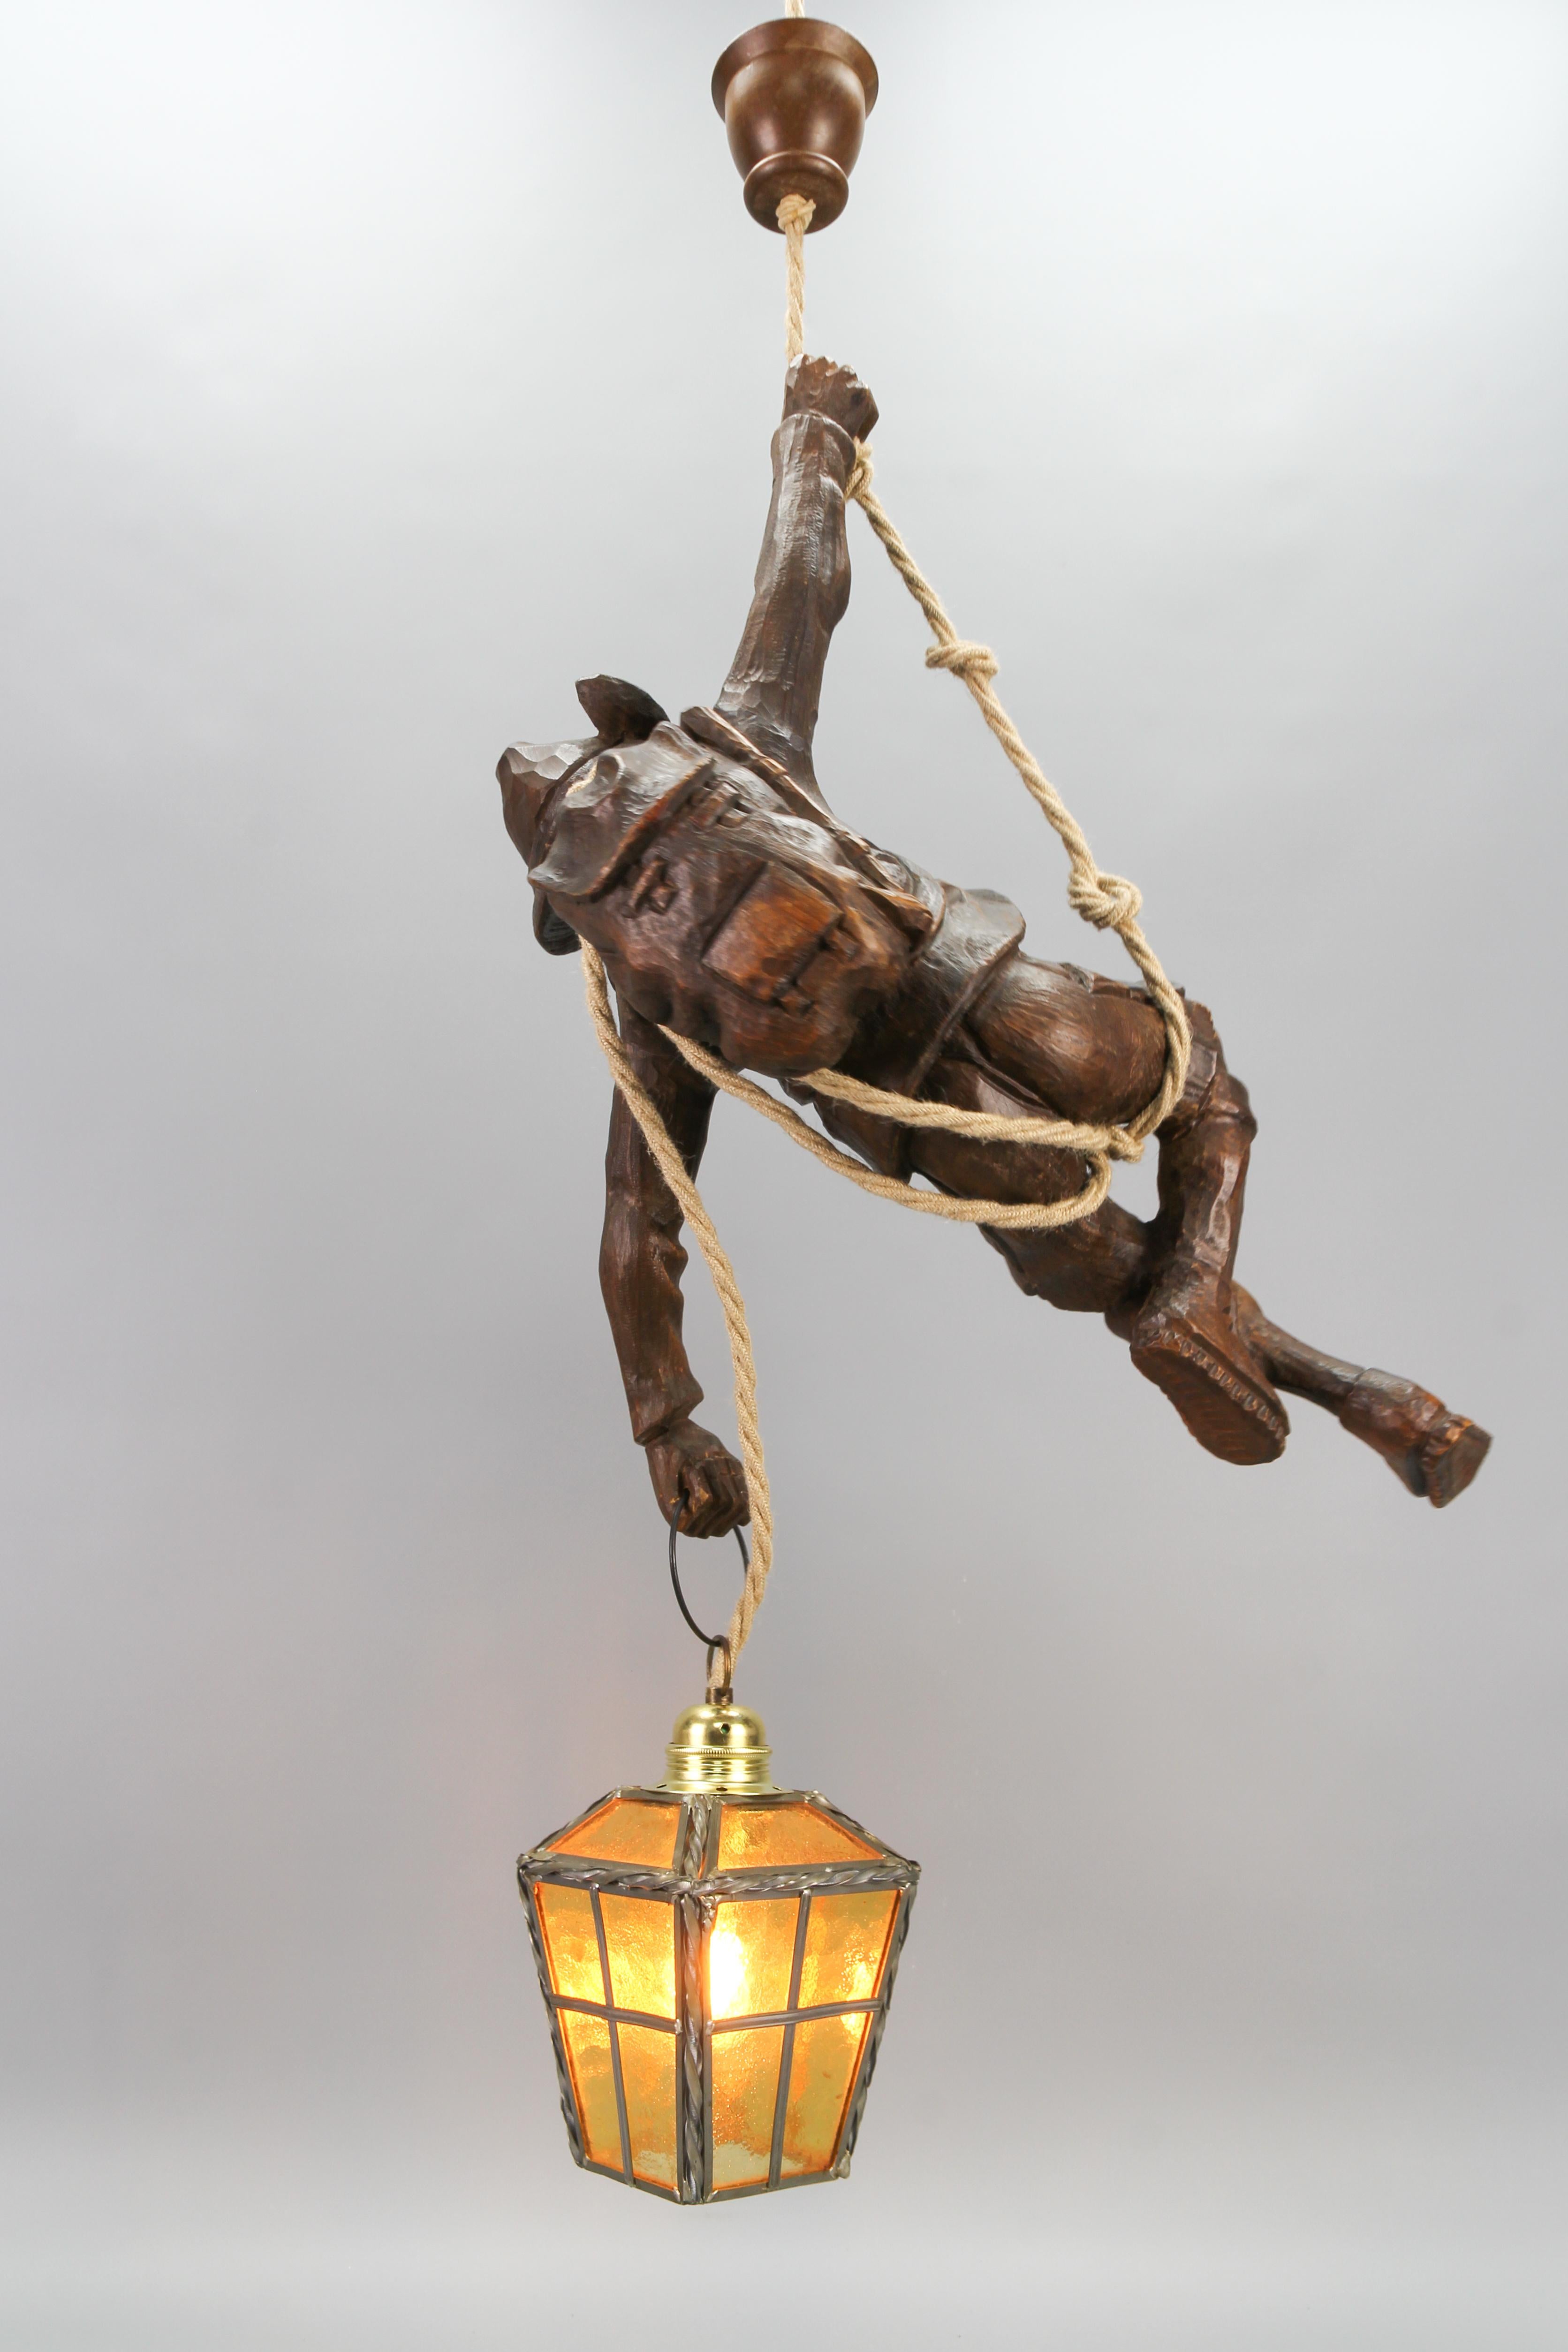 Hand-Carved Large Pendant Light Fixture with Carved Climber Figure and Lantern, Germany For Sale